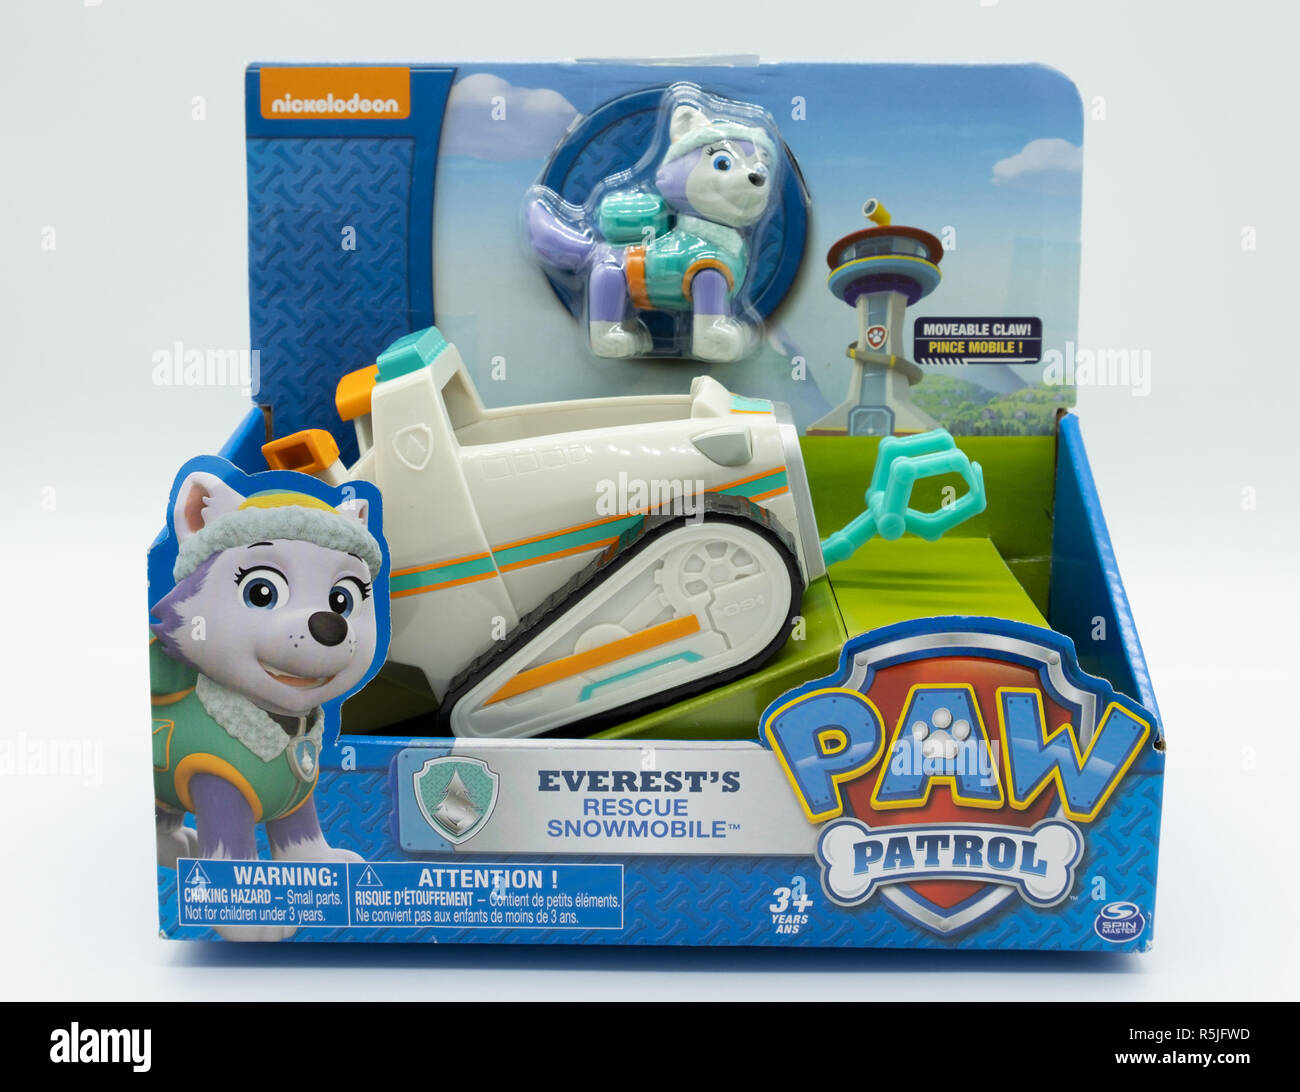 Largs, Scotland, UK - November, 29, 2018: Nickelodeon branded Paw patrol  children's toy in recyclable packaging and in line with current UK  guidelines Stock Photo - Alamy